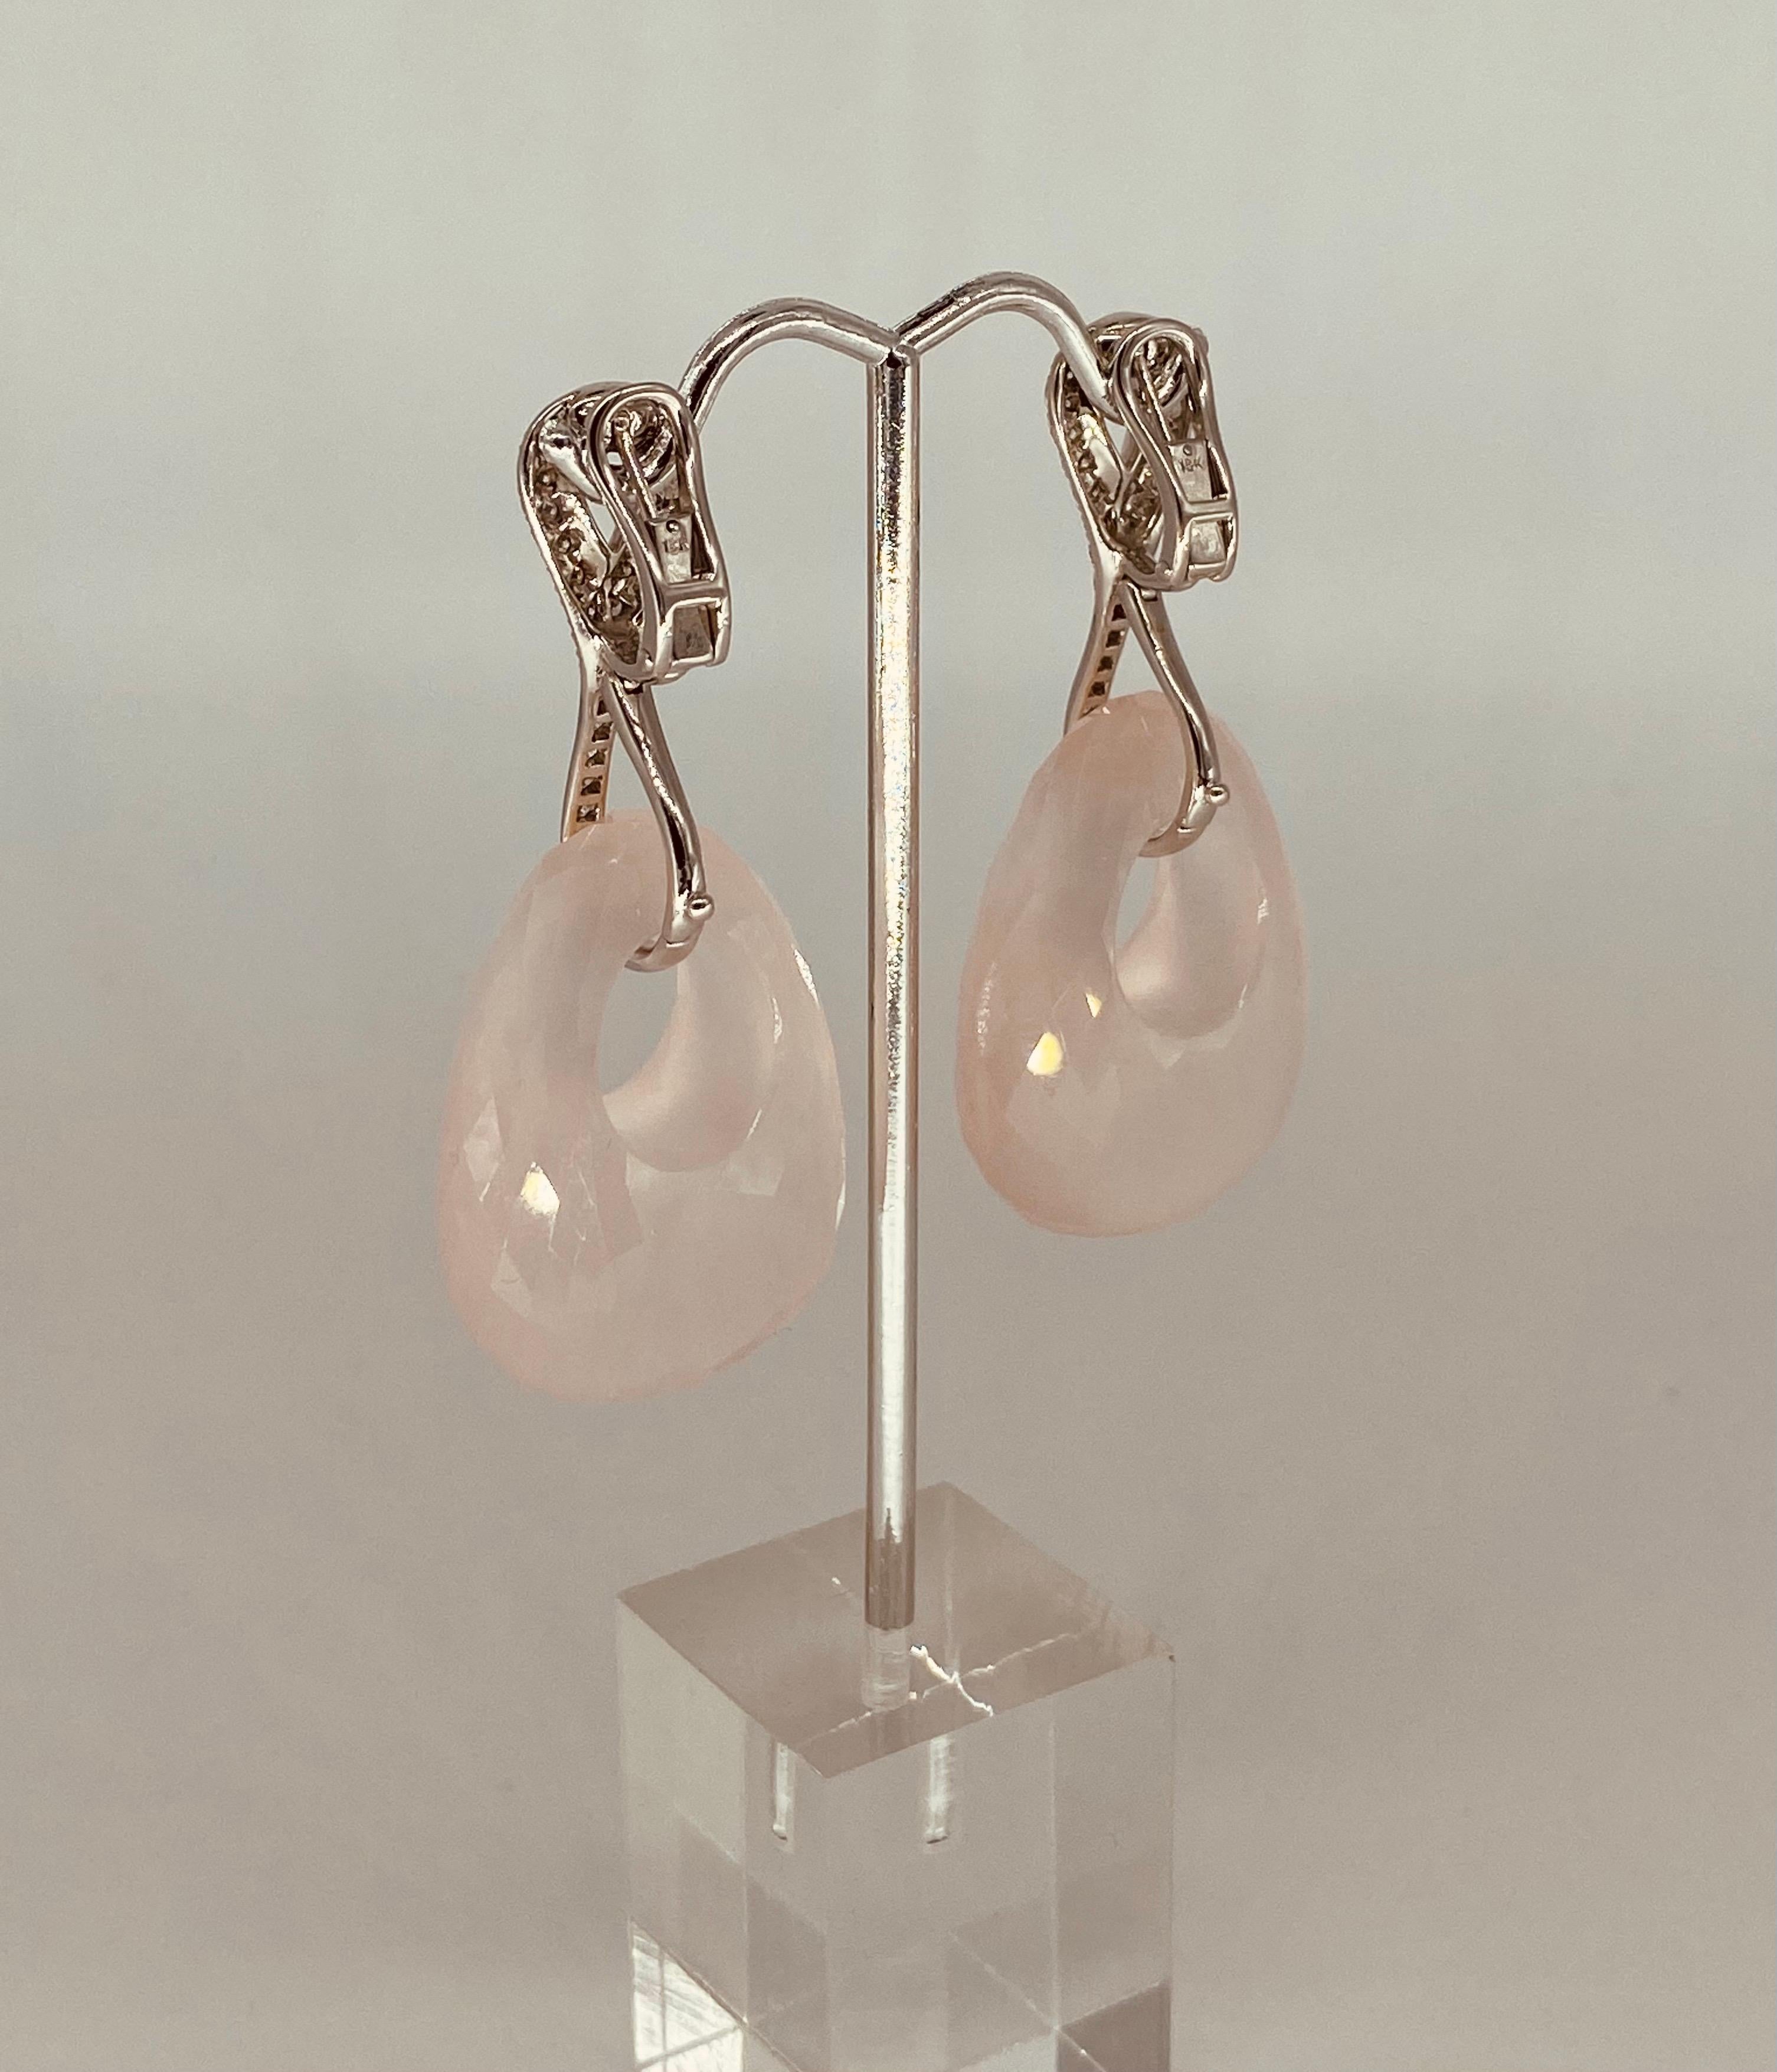 135.5 Carat Oval Rose Quartz With White Diamonds Clip On Duo Dangling Earrings.
Beautifully assembled with master work experience. These earrings a fashion statement! The earrings feature an optional in-ear stems or simply clip earrings. Featuring